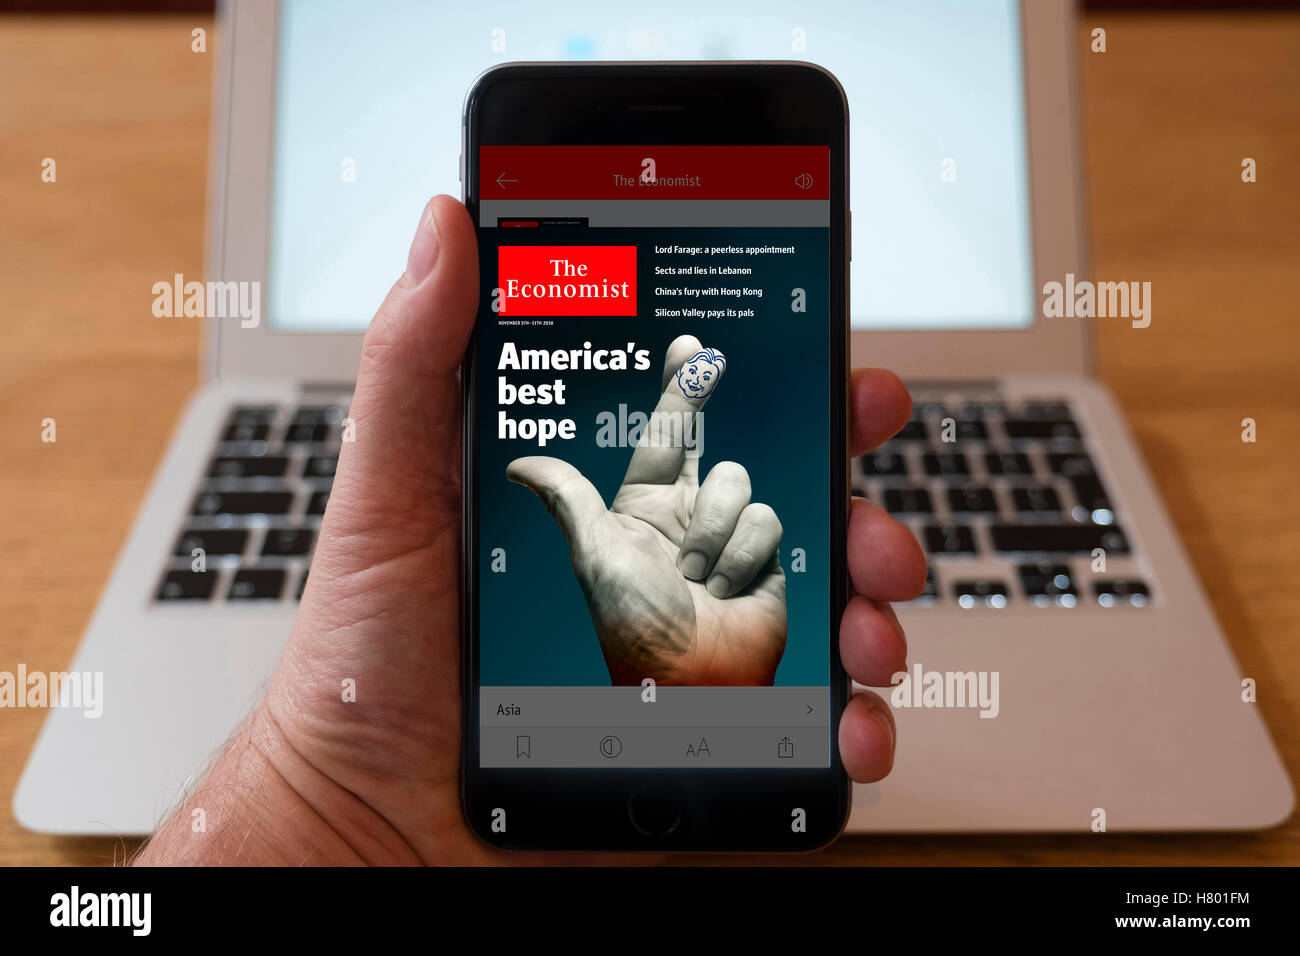 Using iPhone smartphone to display front page of The Economist current affairs newspaper Stock Photo